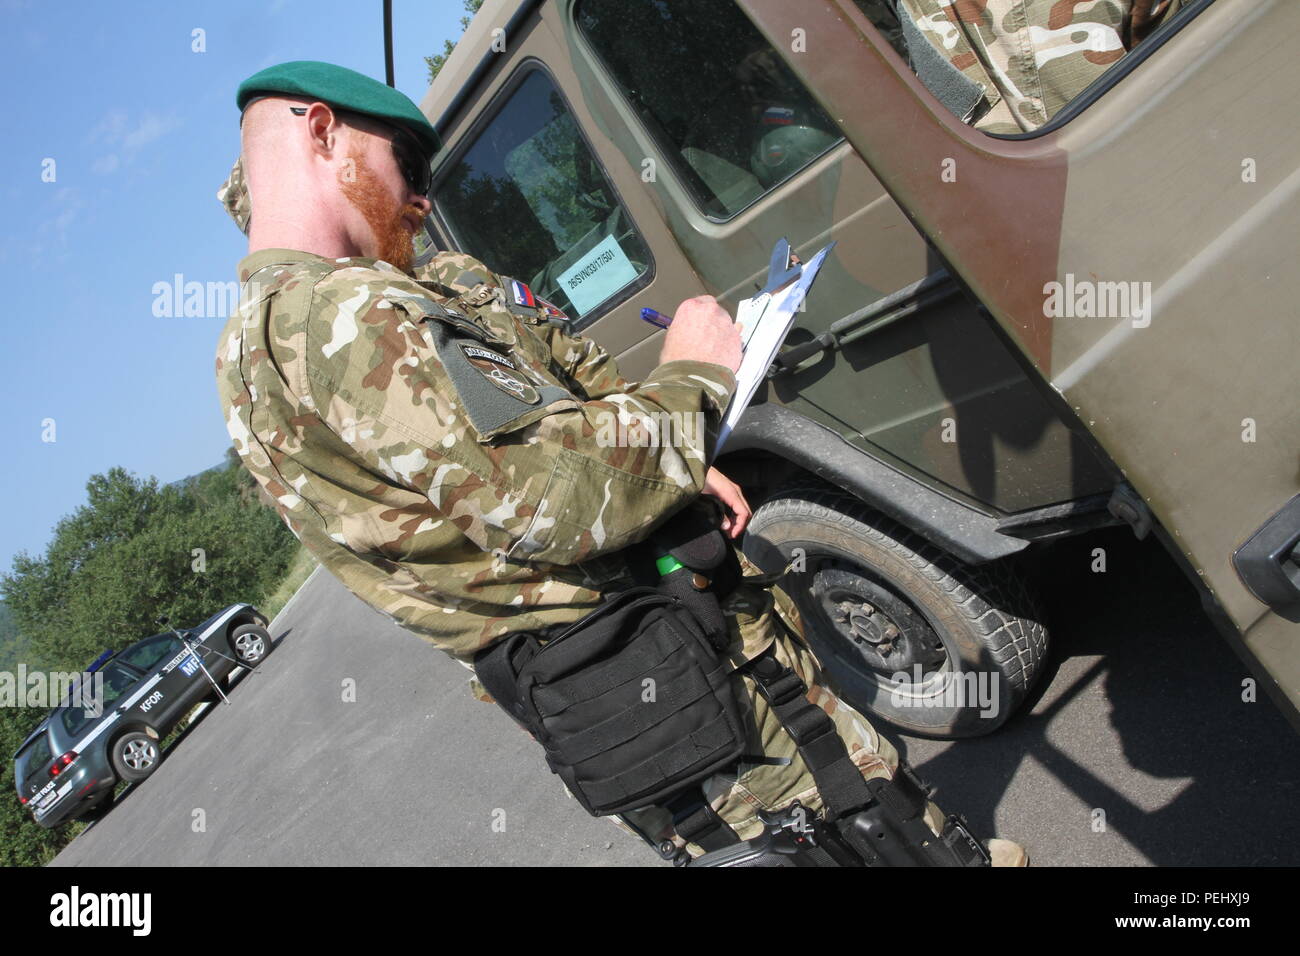 Slovenian 1st Lt. Blaz Primc, the commander for Slovenian military police in Kosovo, performs a joint traffic control point inspection with Kosovo Force International Military Police to ensure soldiers are carrying proper credentials and following safety procedures while driving, Aug. 26, 2015, outside Camp Nothing Hill near Leposavic, Kosovo. The TCPs are set up as a safety measure for multinational forces under NATO to make sure they are operating within the proper regulations in support of freedom of movement and a safe and secure environment in Kosovo. (U.S. Army photo by Sgt. Erick Yates, Stock Photo